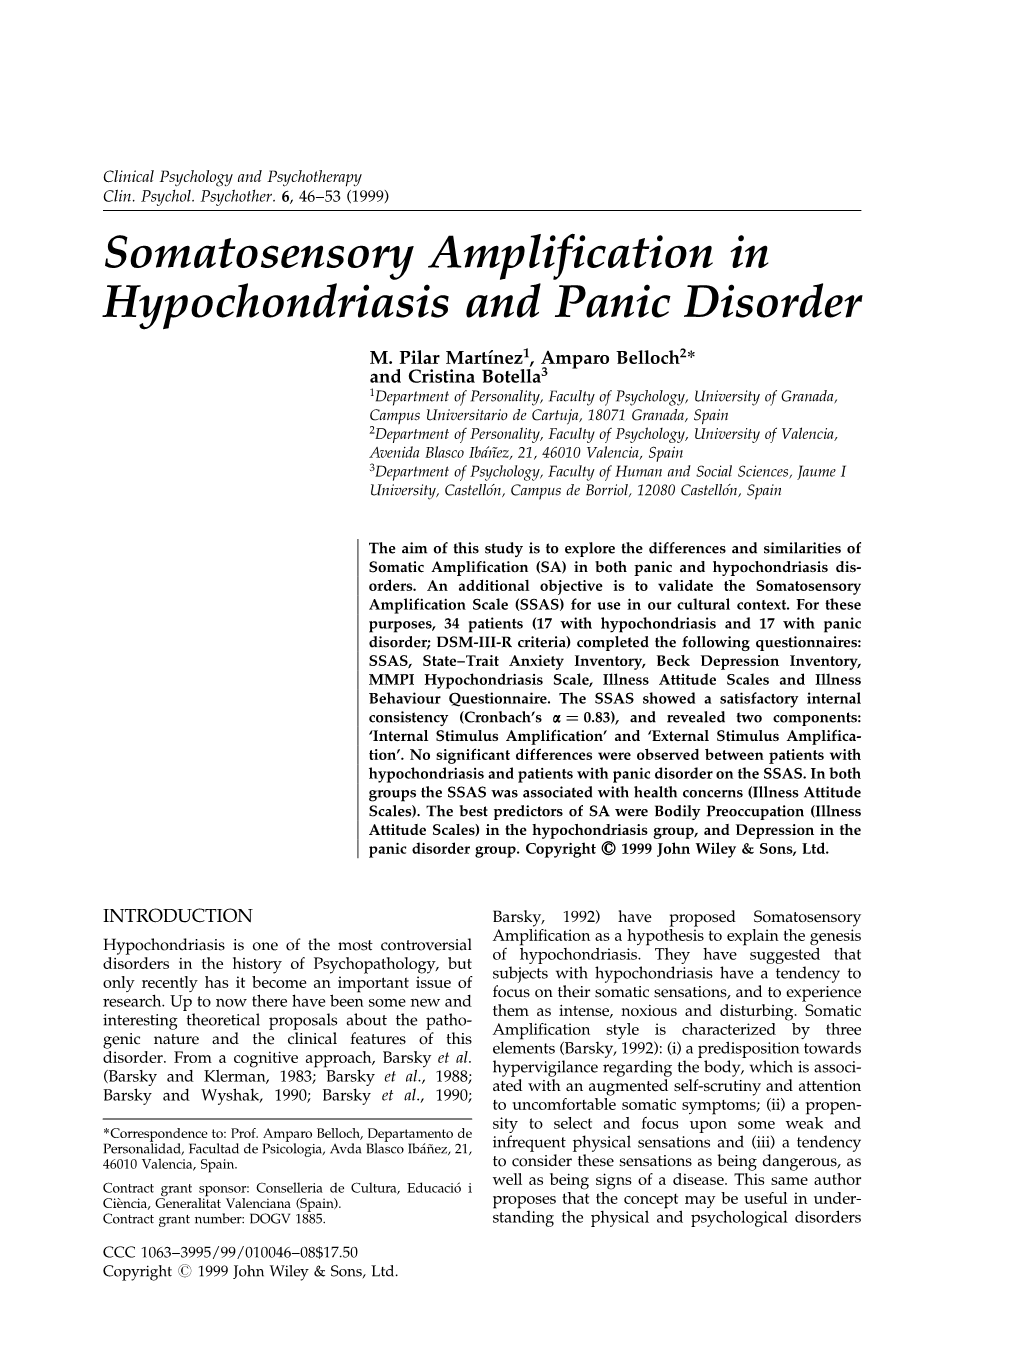 Somatosensory Amplification in Hypochondriasis and Panic Disorder